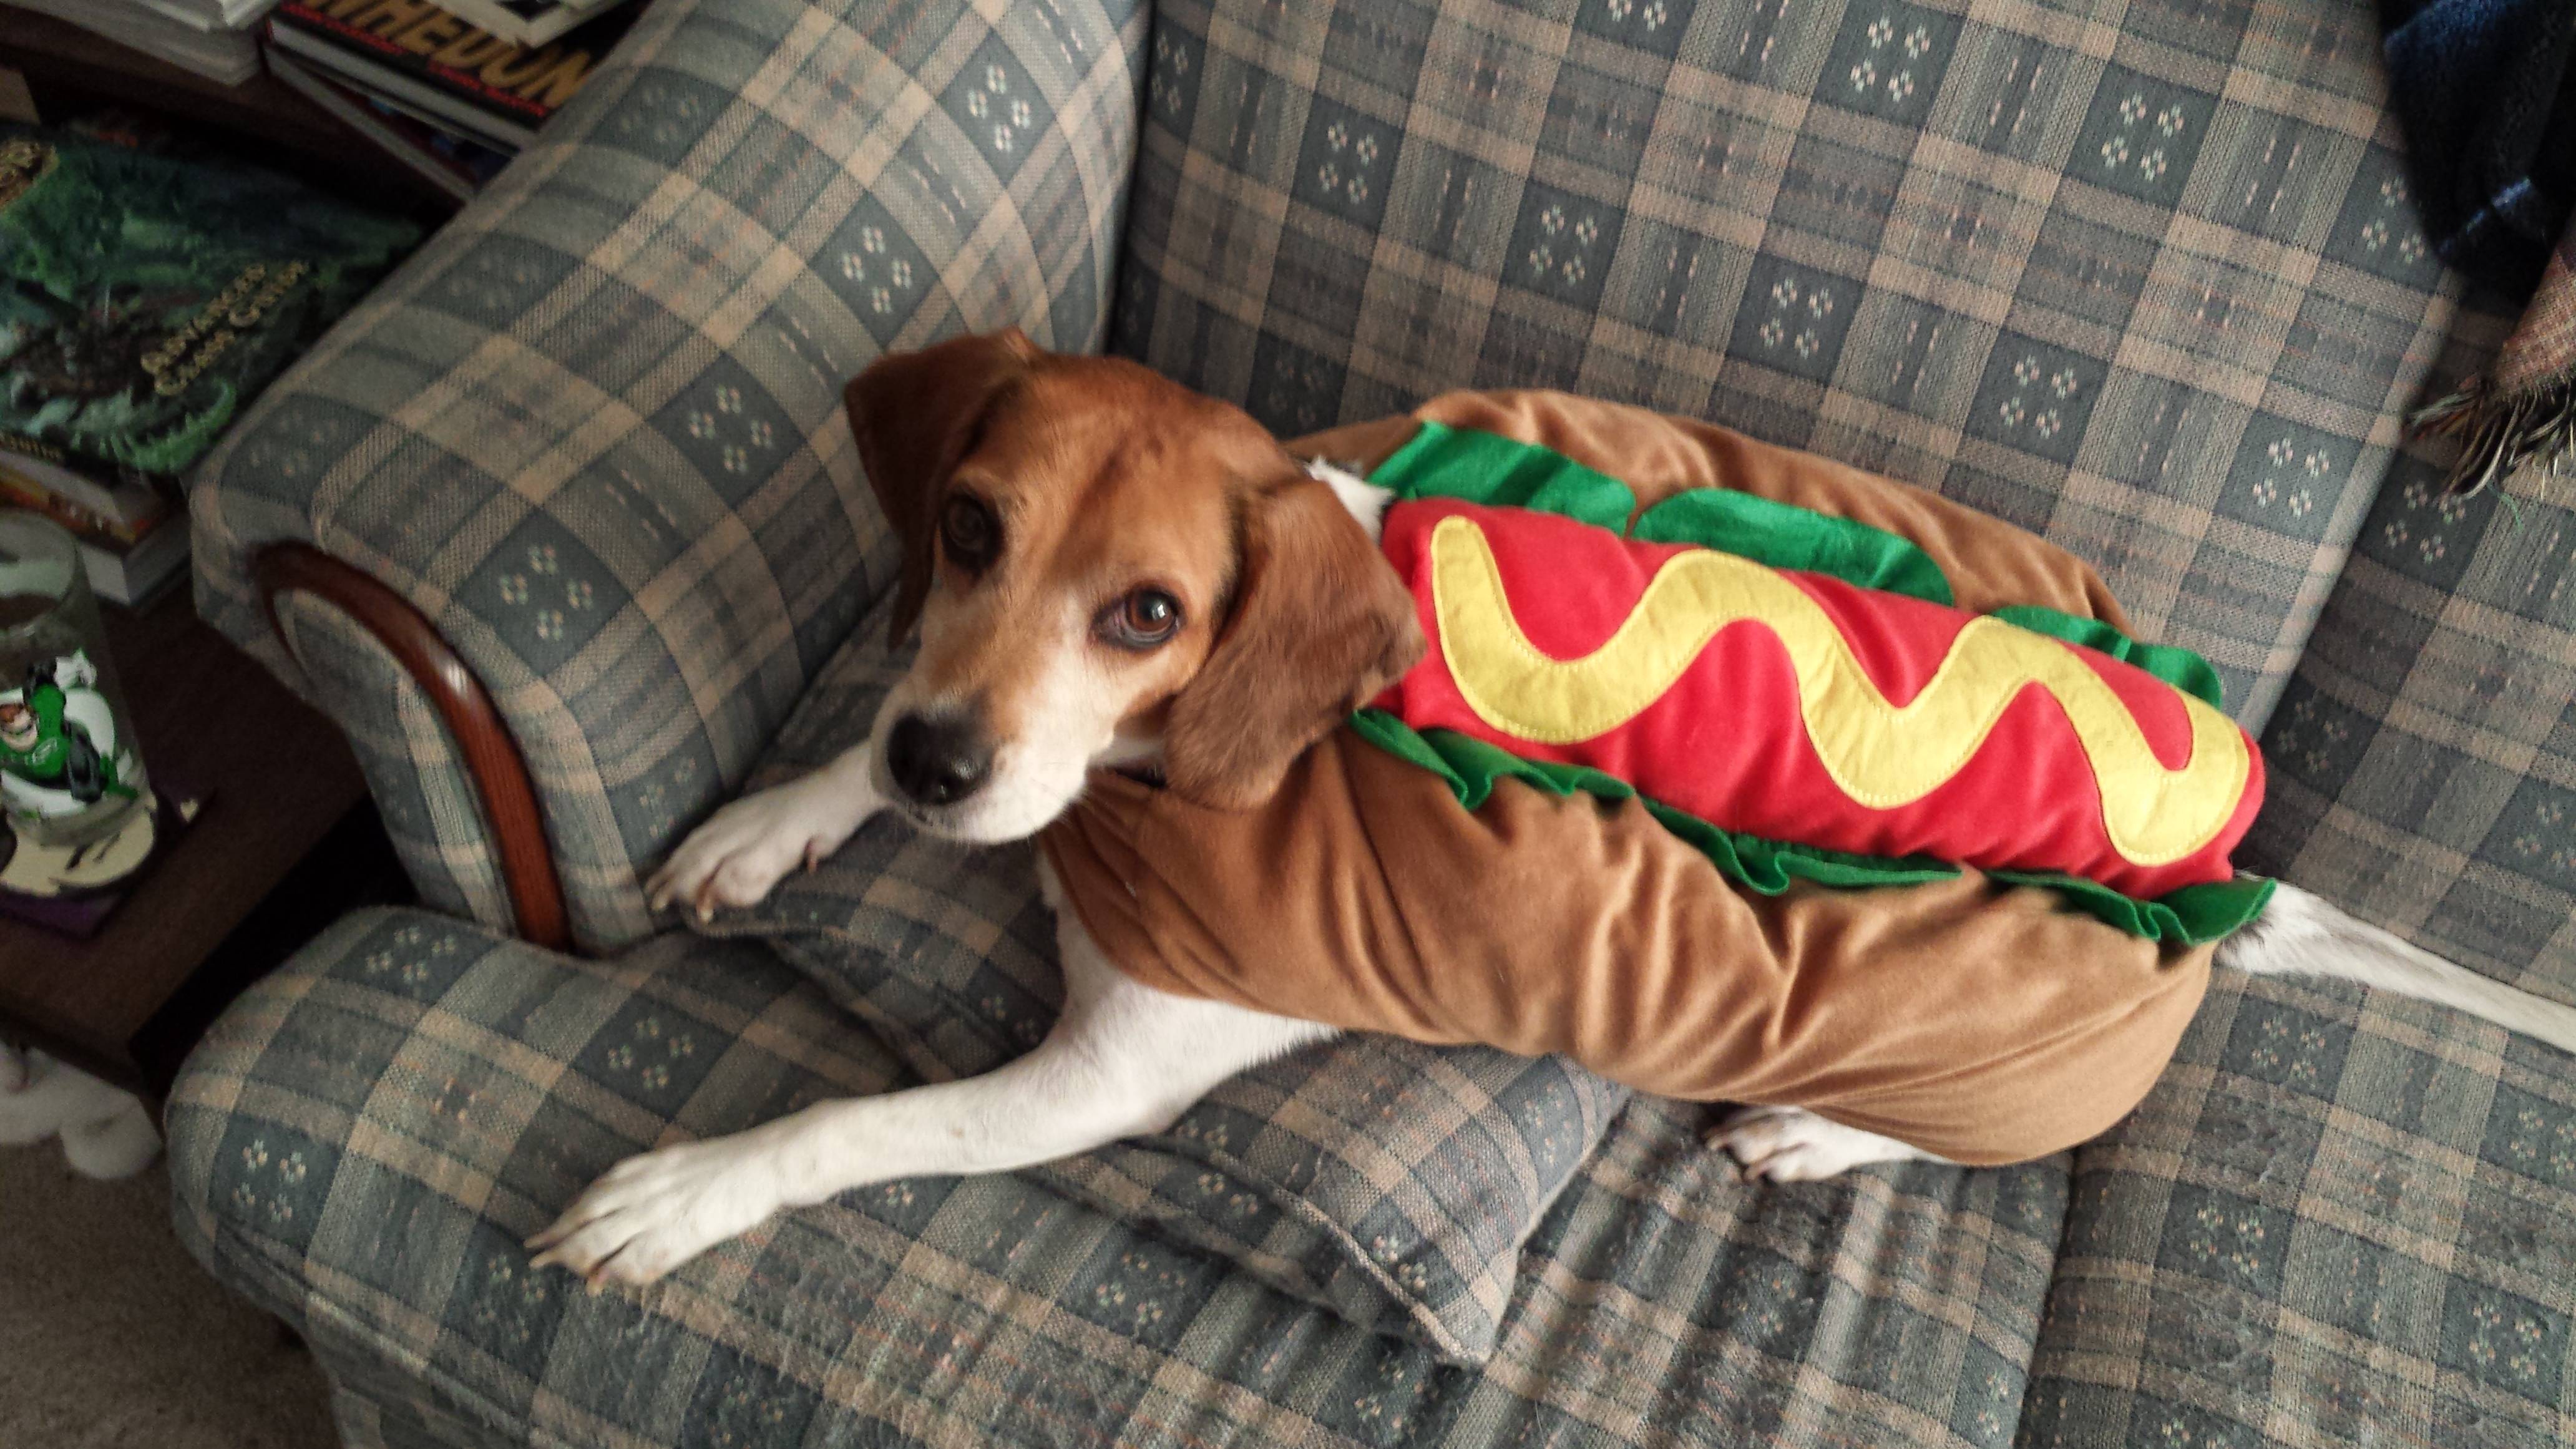 Beagle in a hotdog in a bun costume while lying on the couch